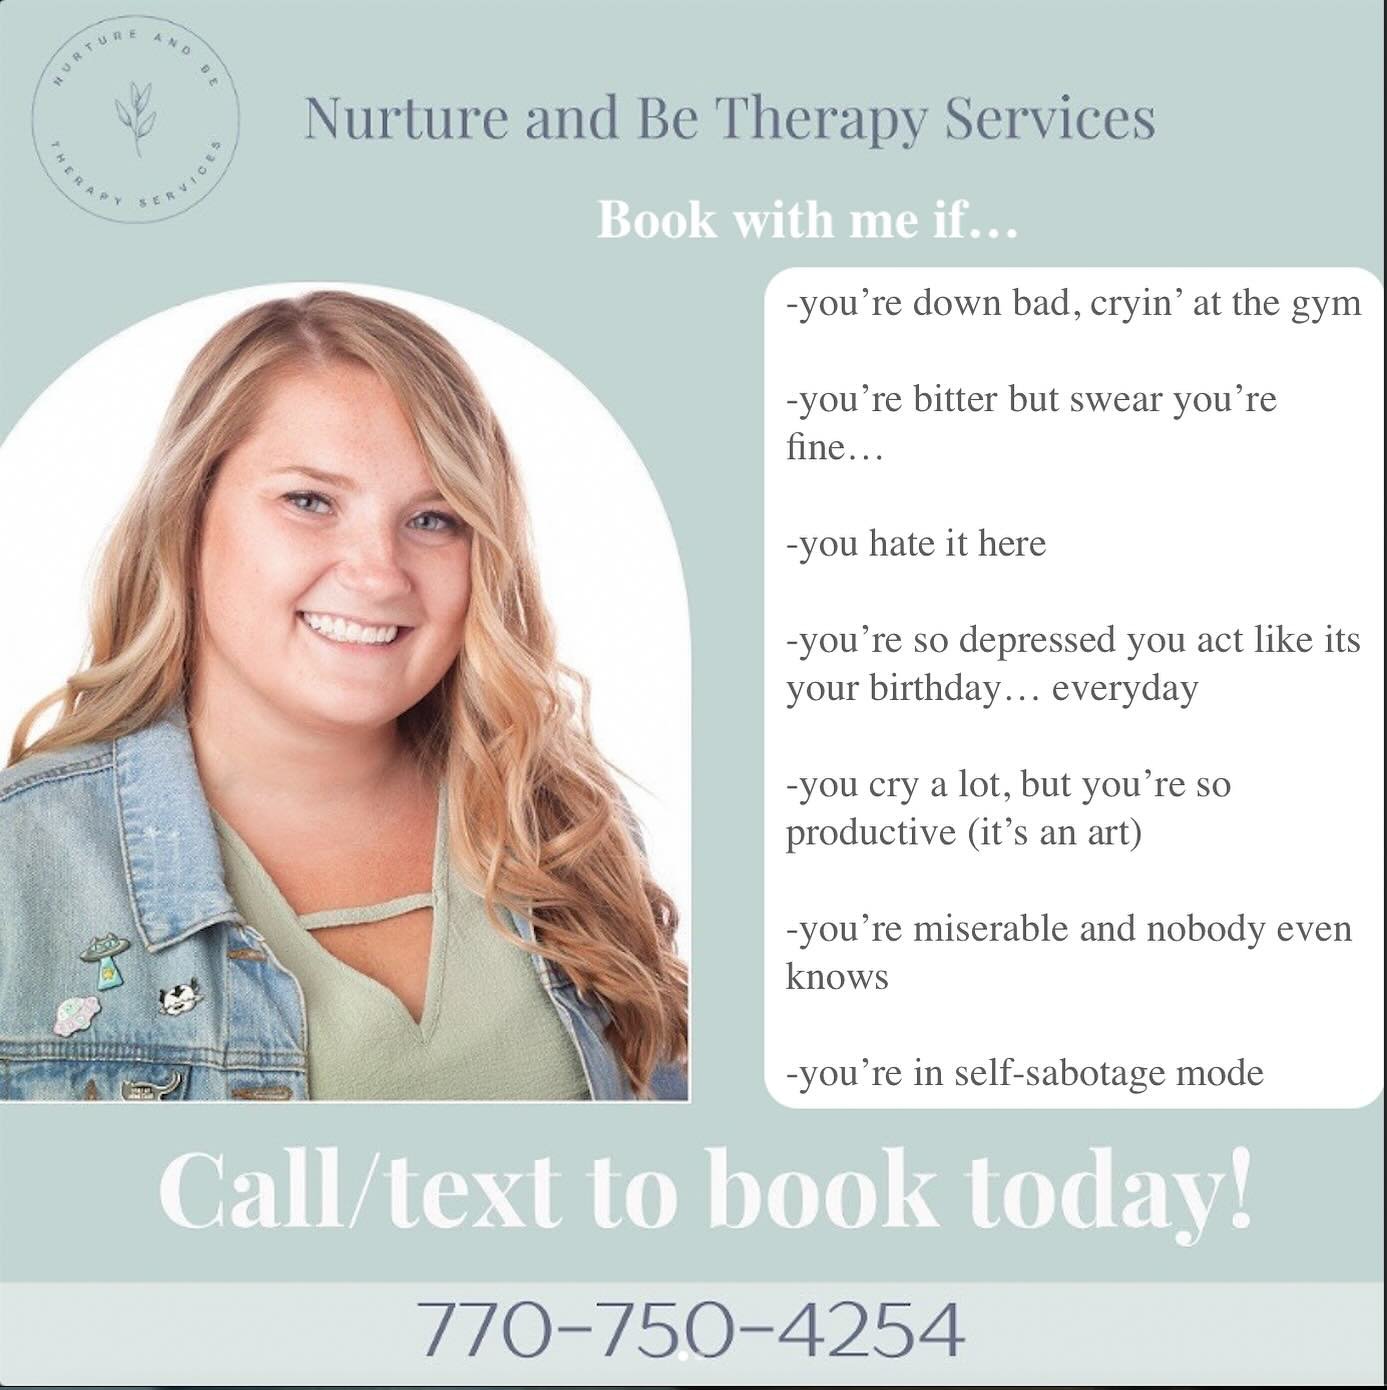 From one of our therapists, Candice! 

&ldquo;Need a therapist who speaks fluent Taylor Swift? Look no further! From decoding &lsquo;Bad Blood&rsquo; to finding your &lsquo;Wildest Dreams,&rsquo; I&rsquo;ve got you covered. Book with me for laughs an